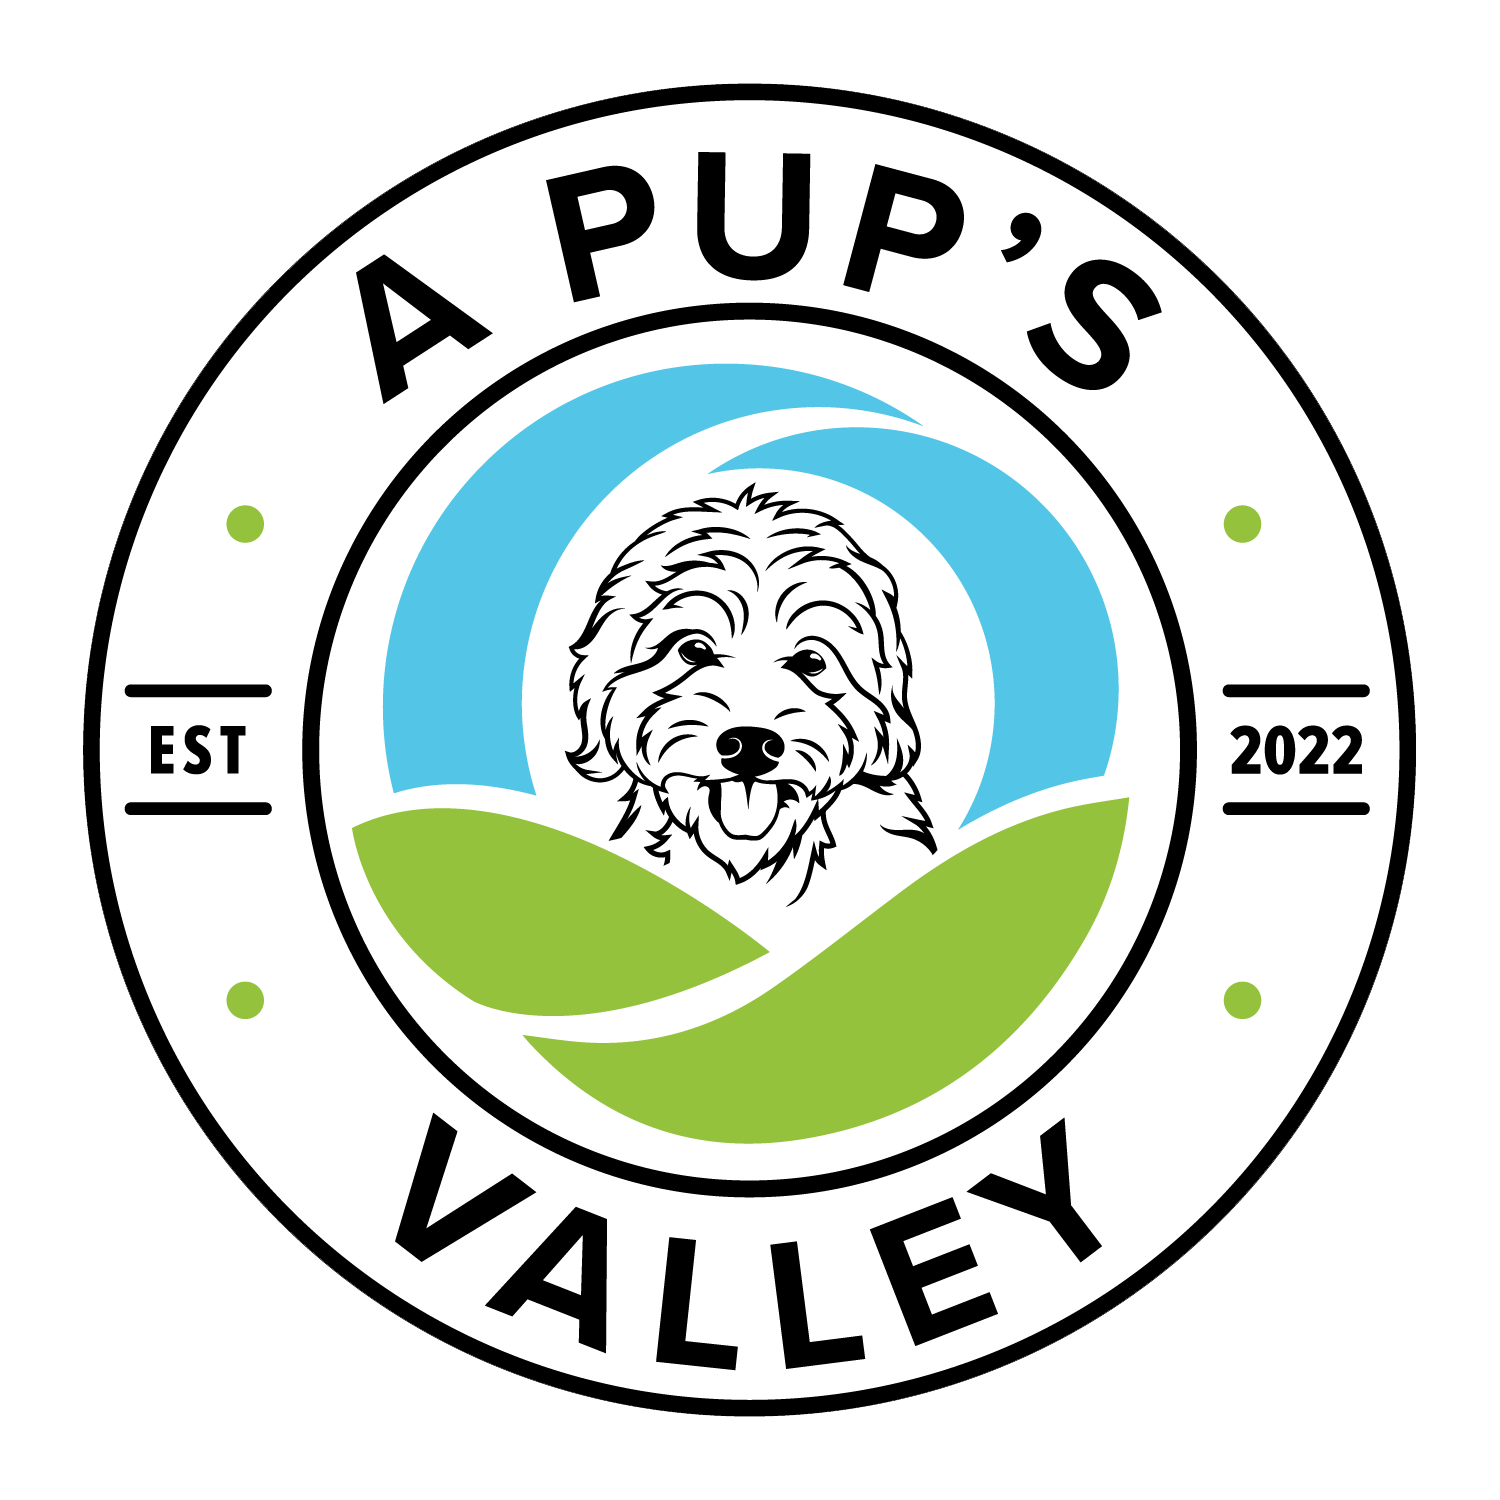 A Pup's Valley logo image